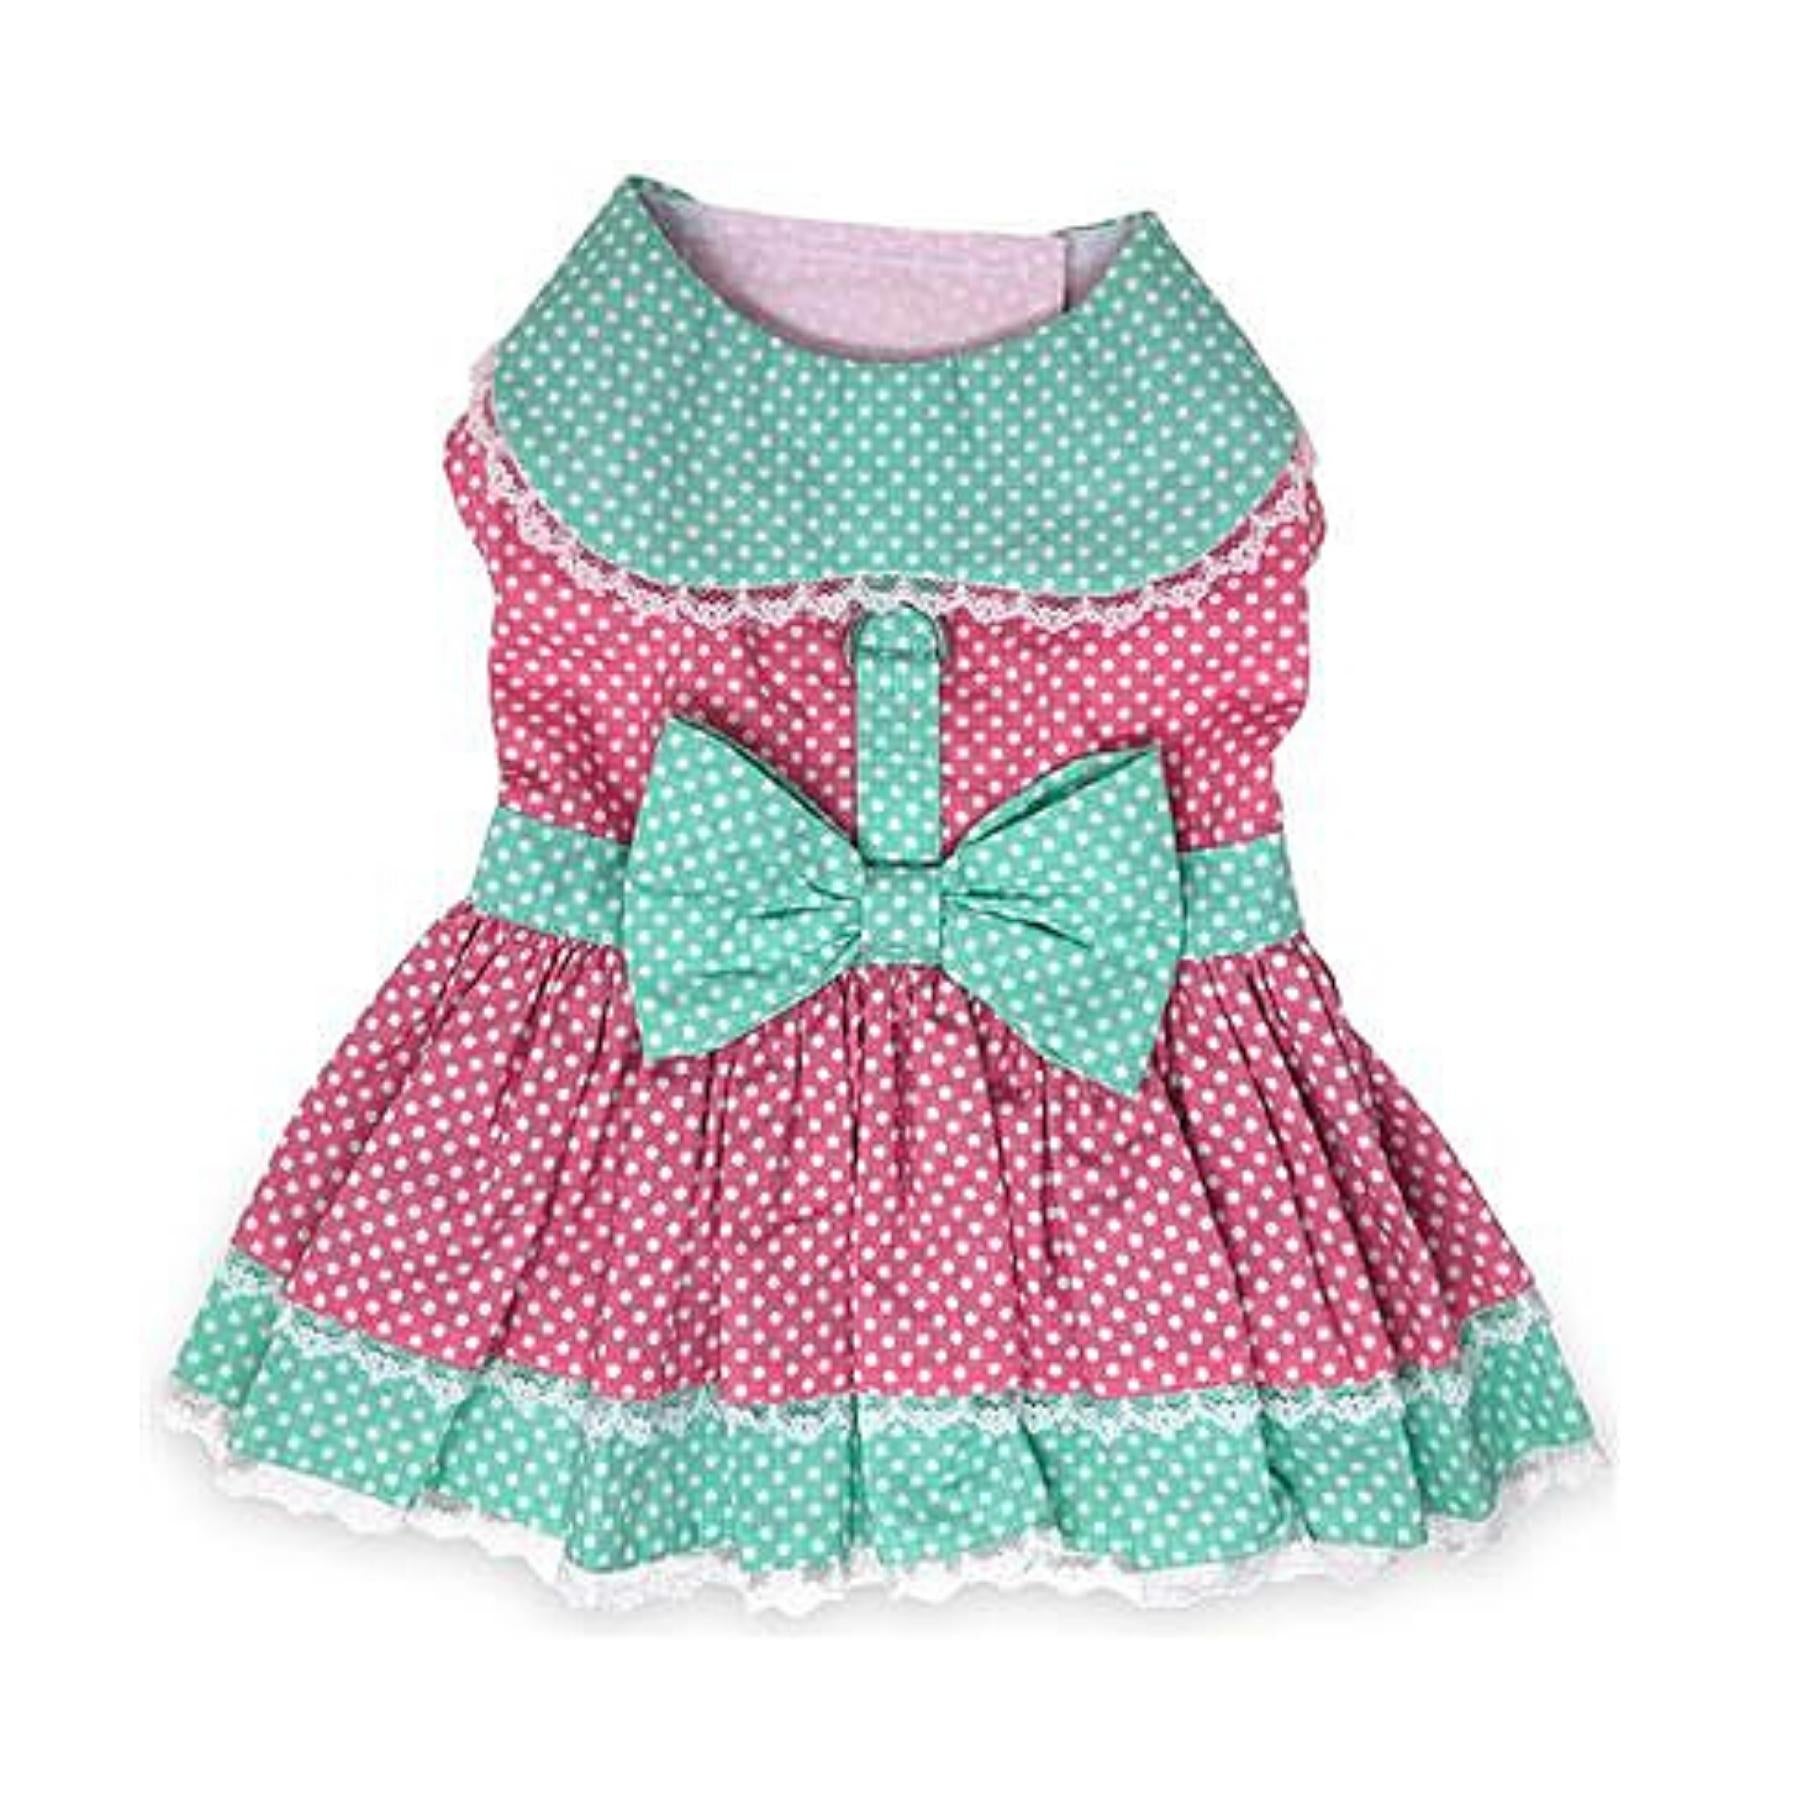 Polka Dot & Lace Dress with Matching Leash - Pink & Teal - Pooch Luxury